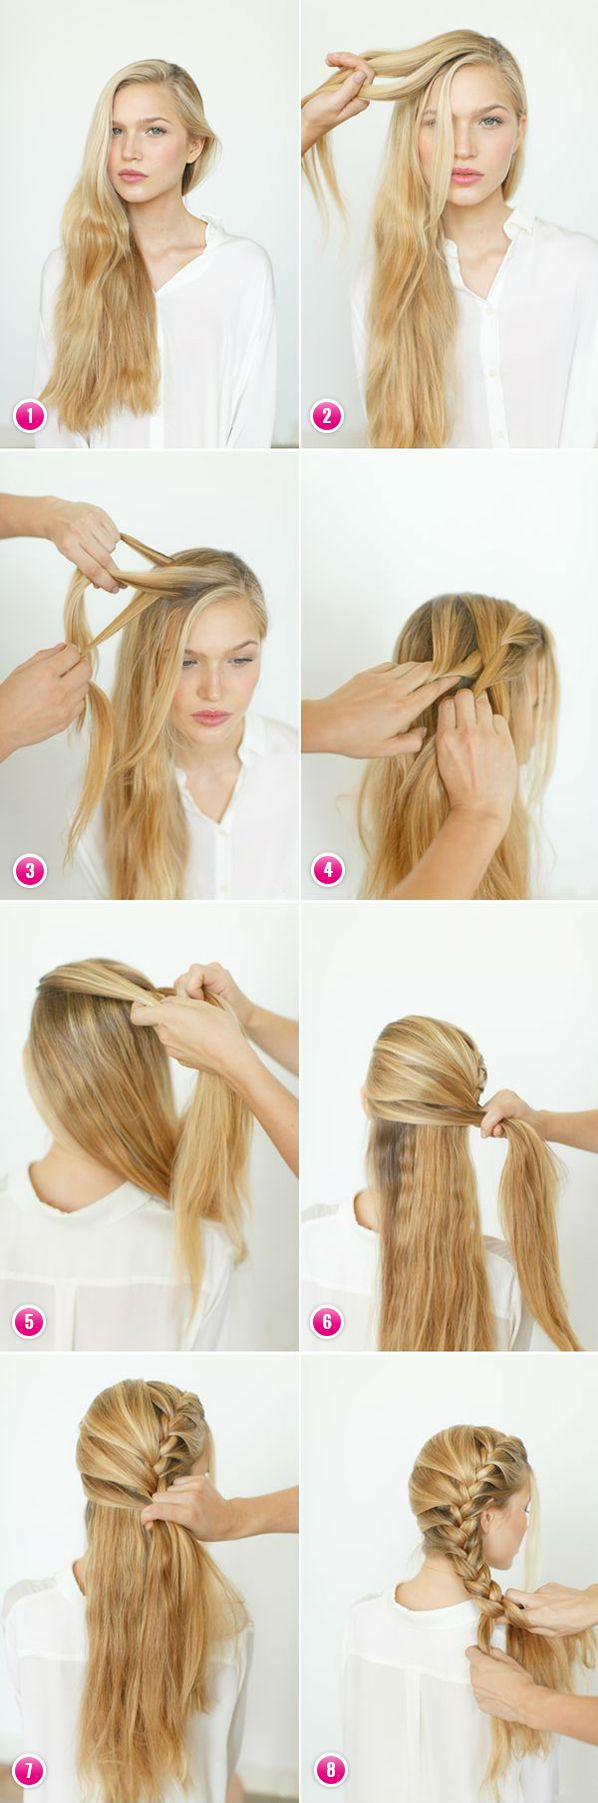 Easy Braided Hairstyles To Do Yourself
 Easy braids for long hair to do yourself